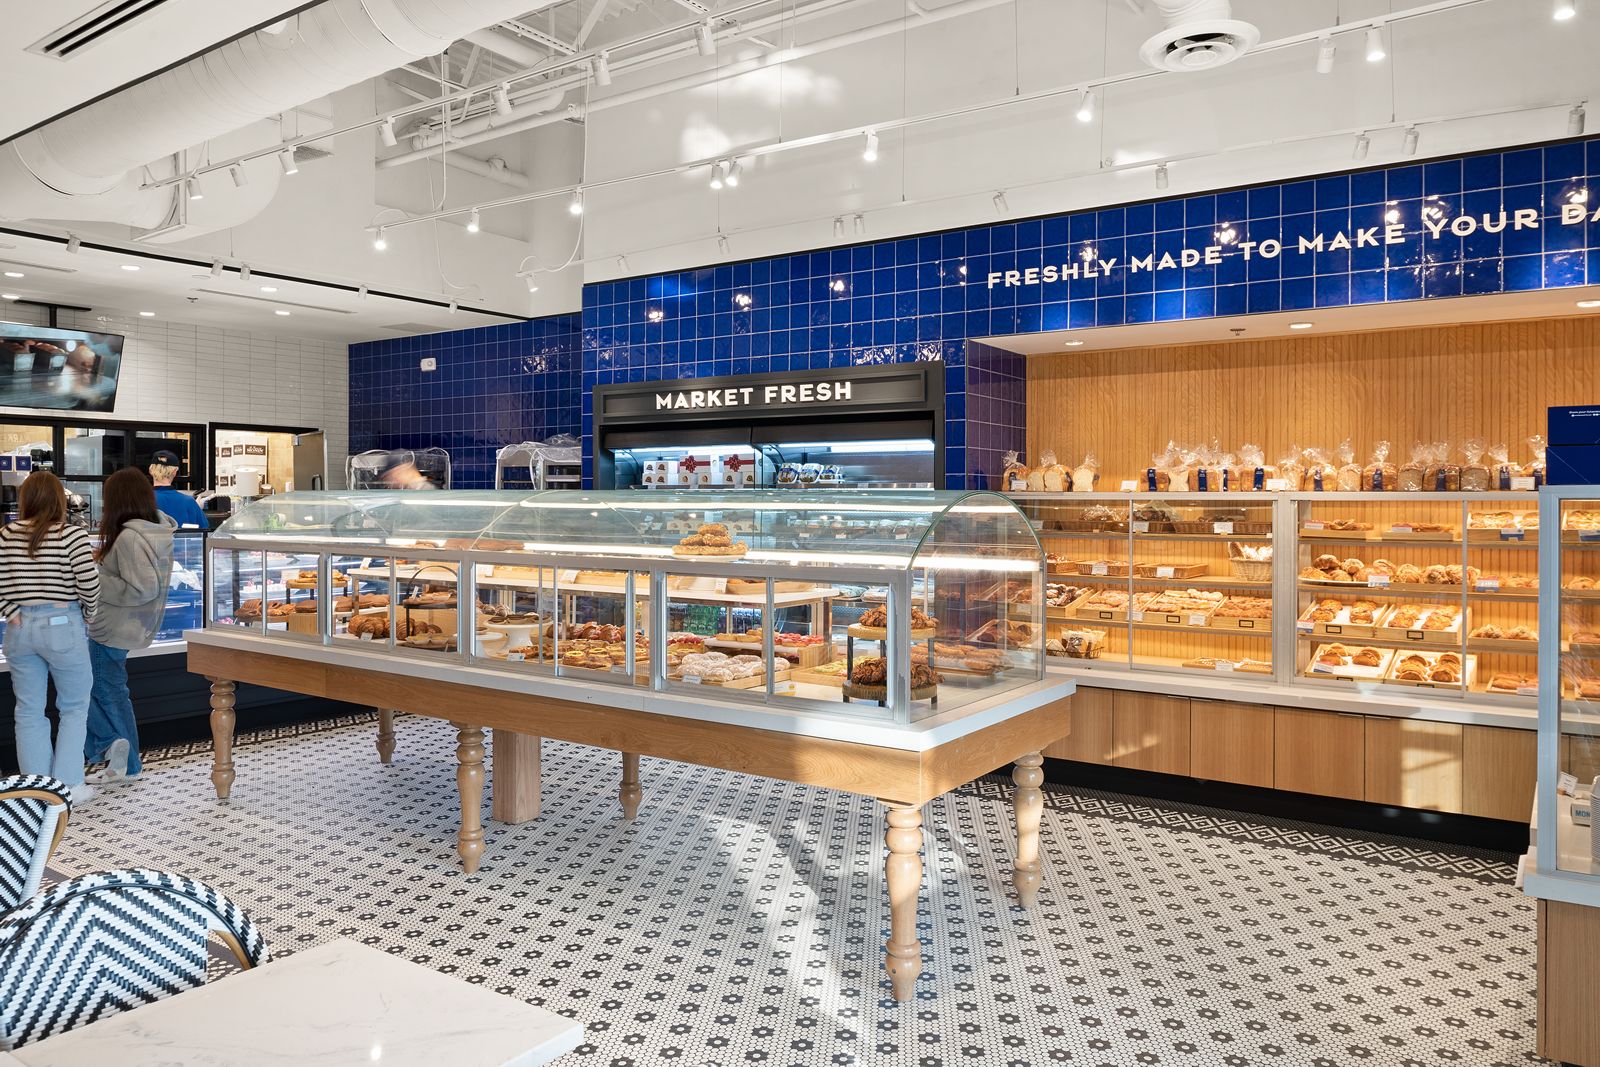 Paris Baguette Continues To Dominate the Bakery Franchise Industry, Signs Agreement in Towson, MD for One Location